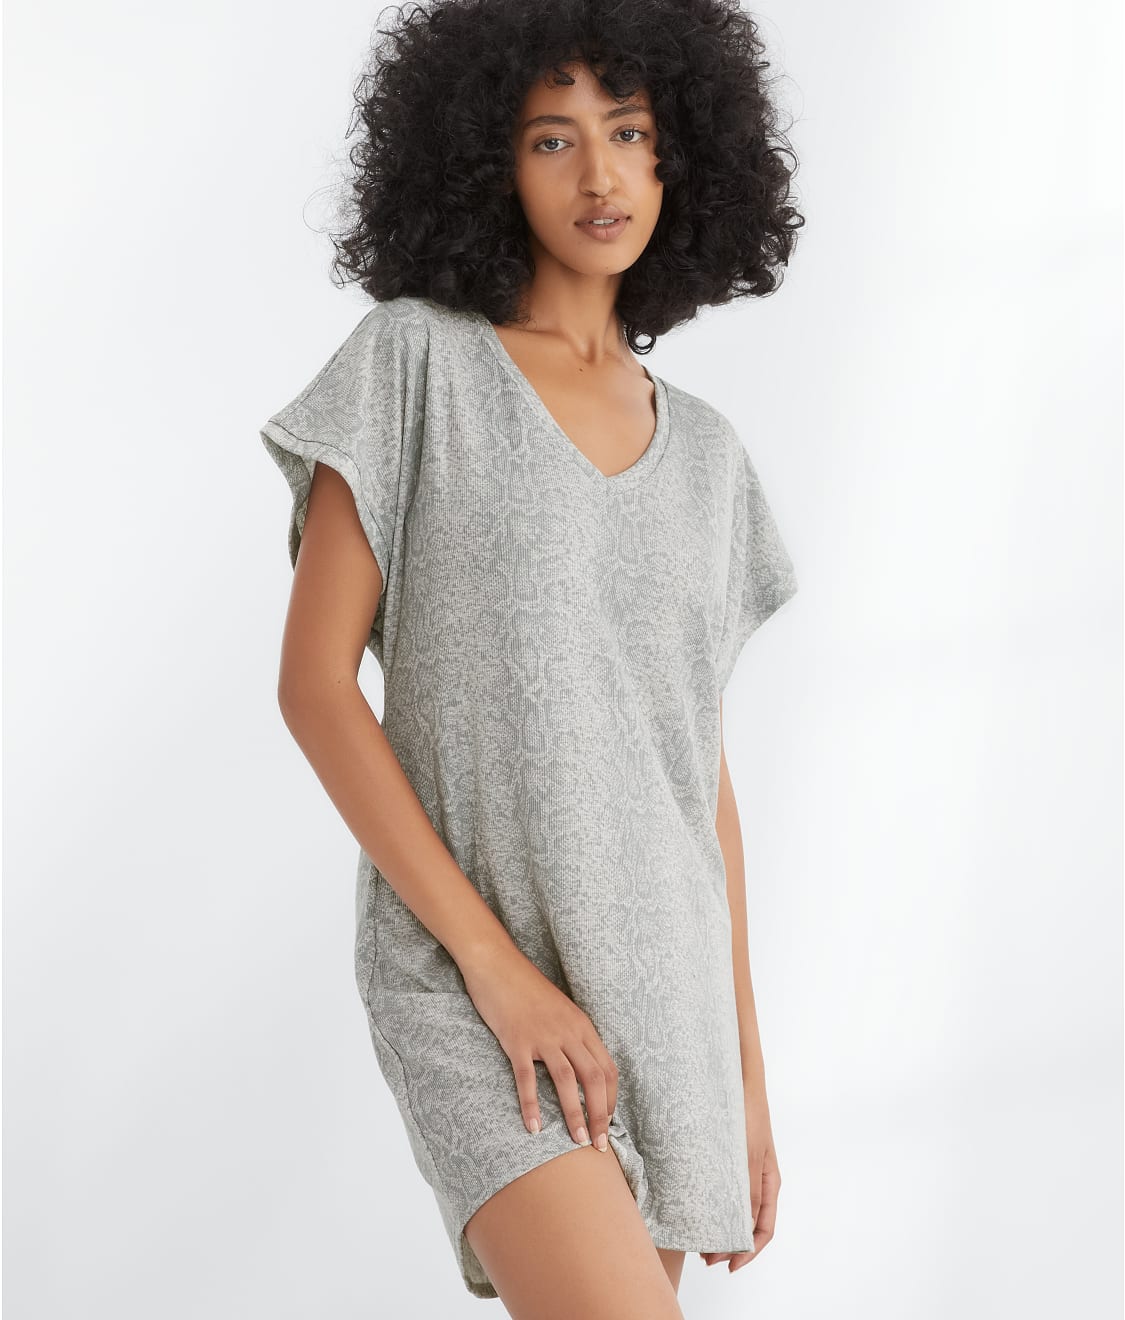 Bare Necessities: Relax, Recharge, Recycled Knit Sleep Dress DRJ230